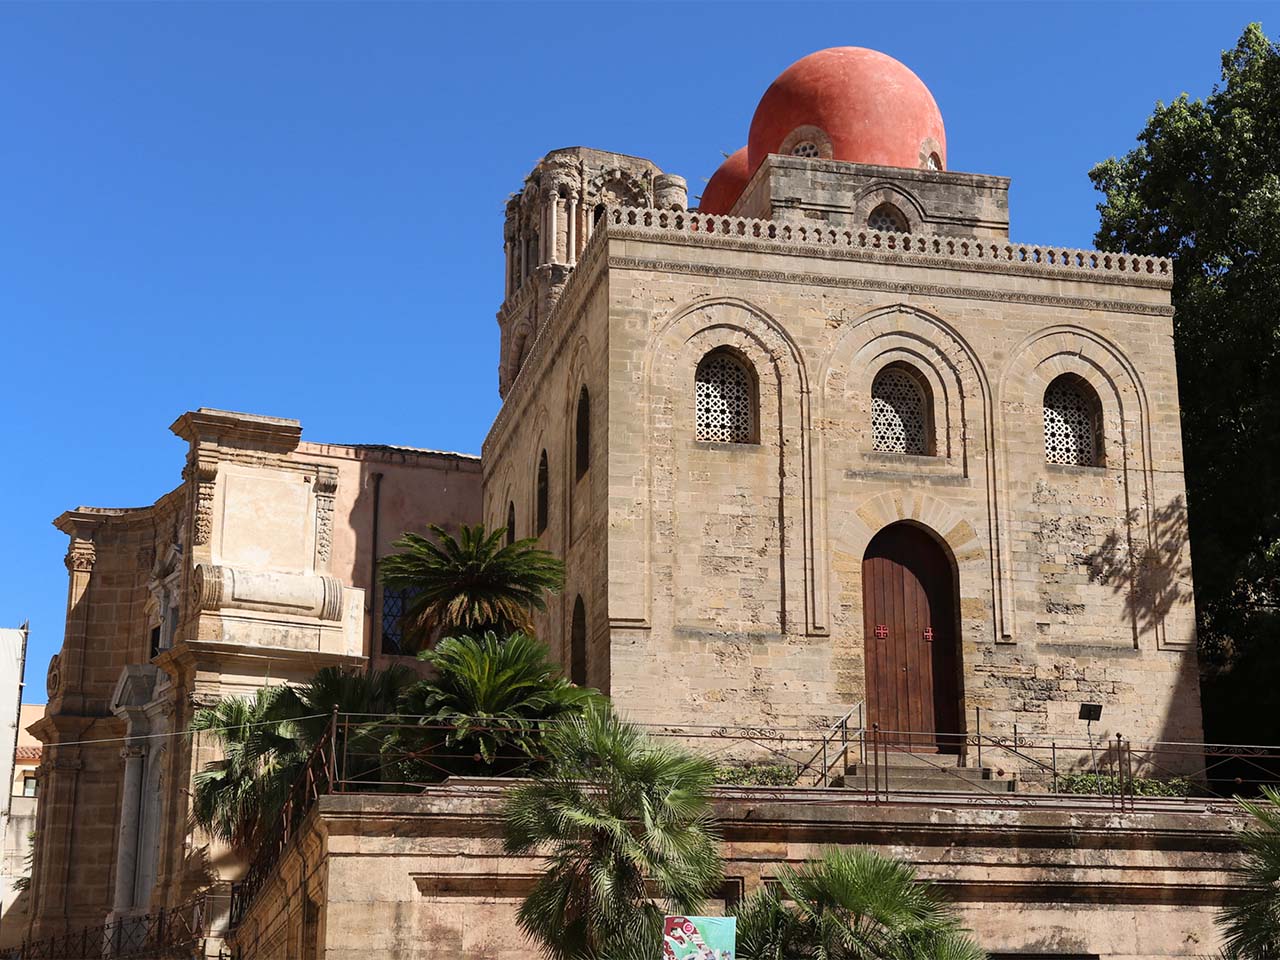 Martorana church in Palermo with its characteristic red domes